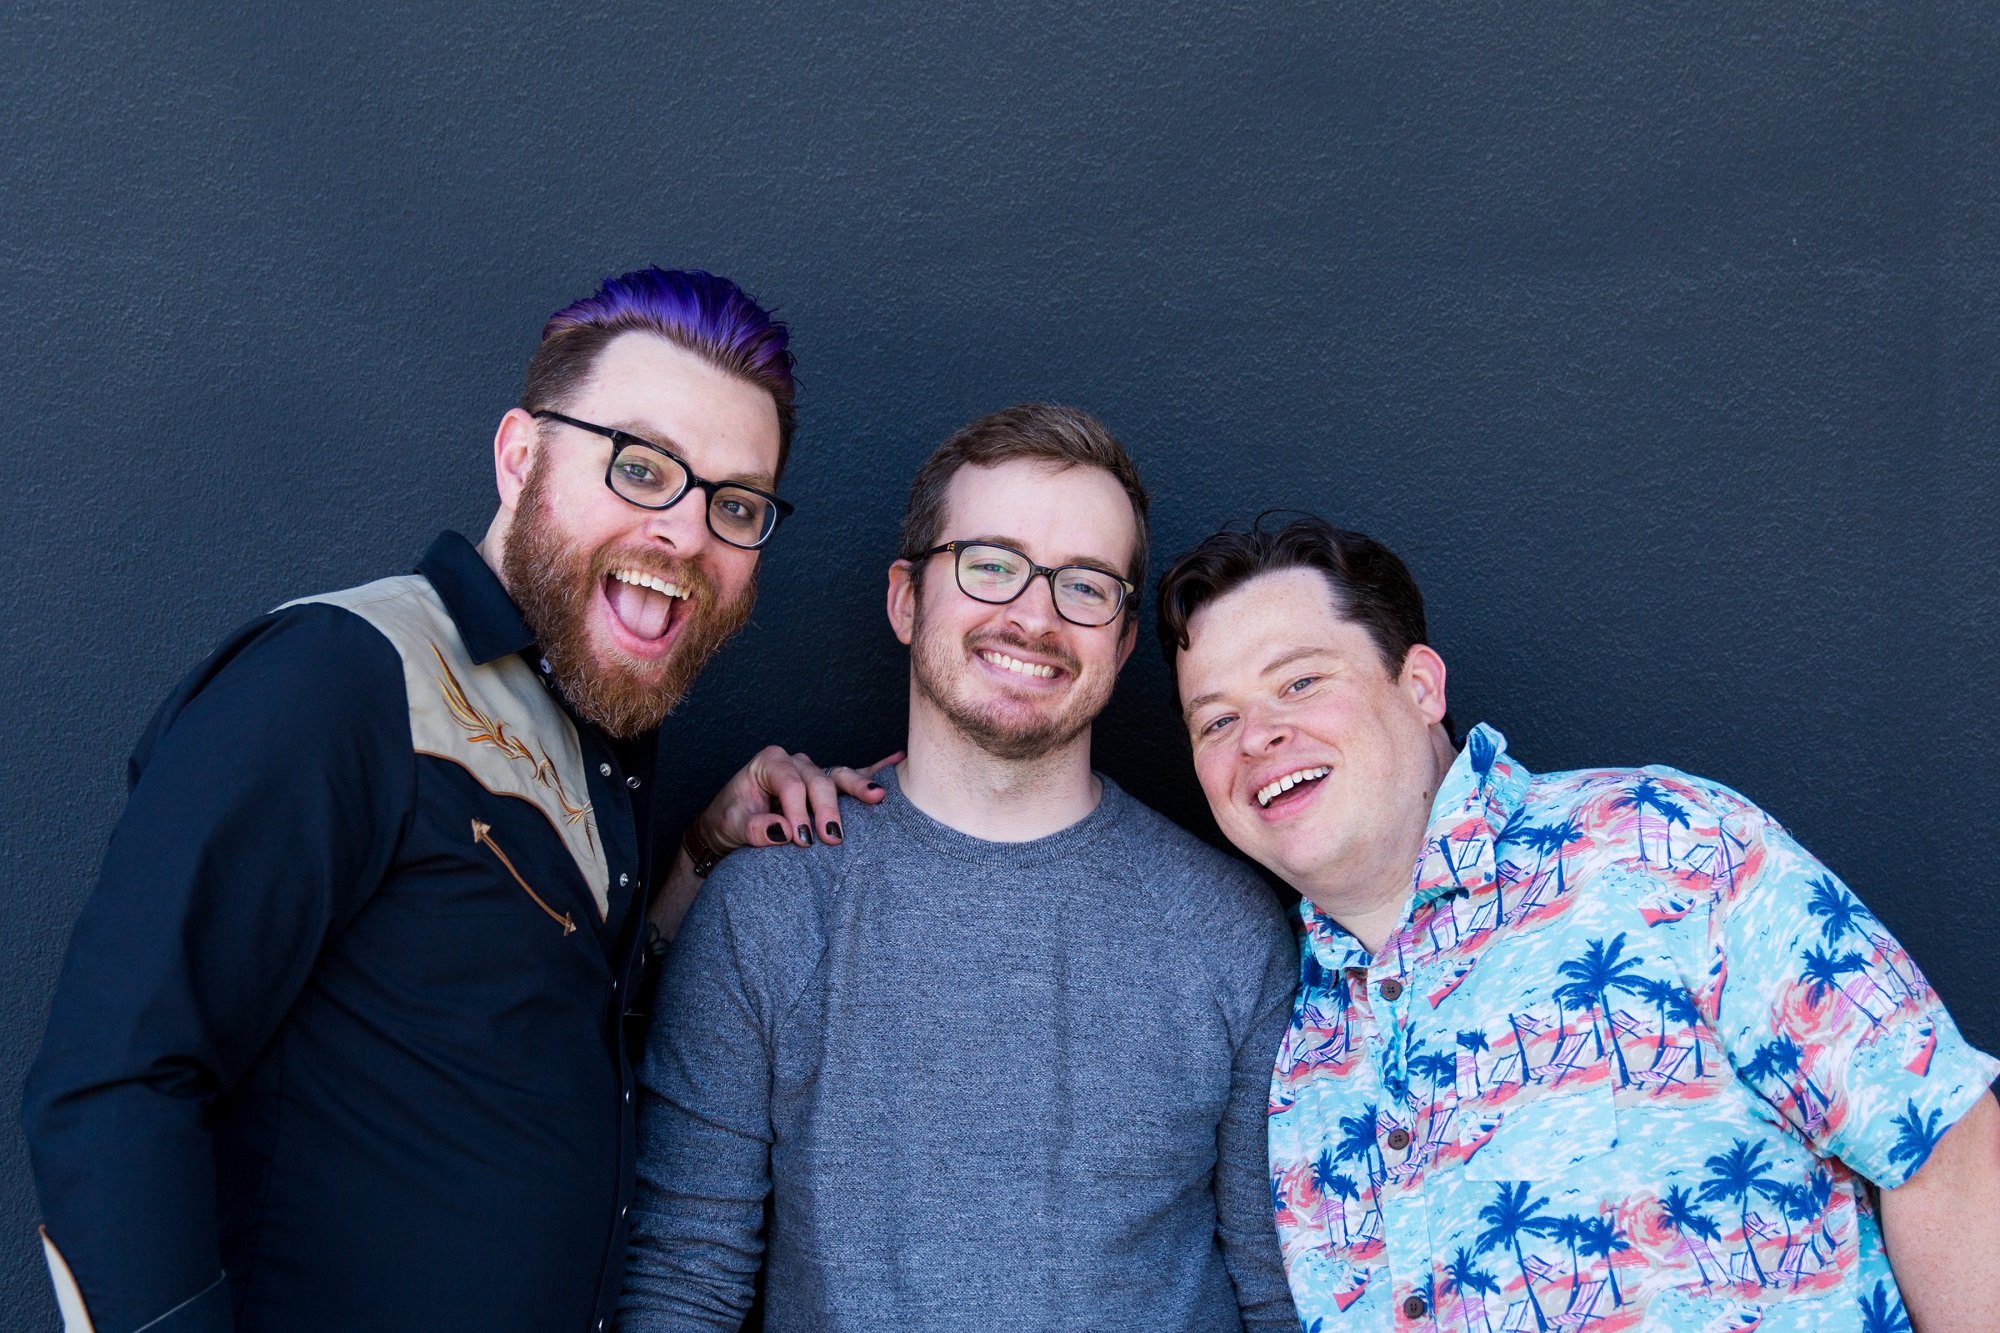 Travis McElroy, Griffin McElroy, and Justin McElroy pose for a portrait photofor a